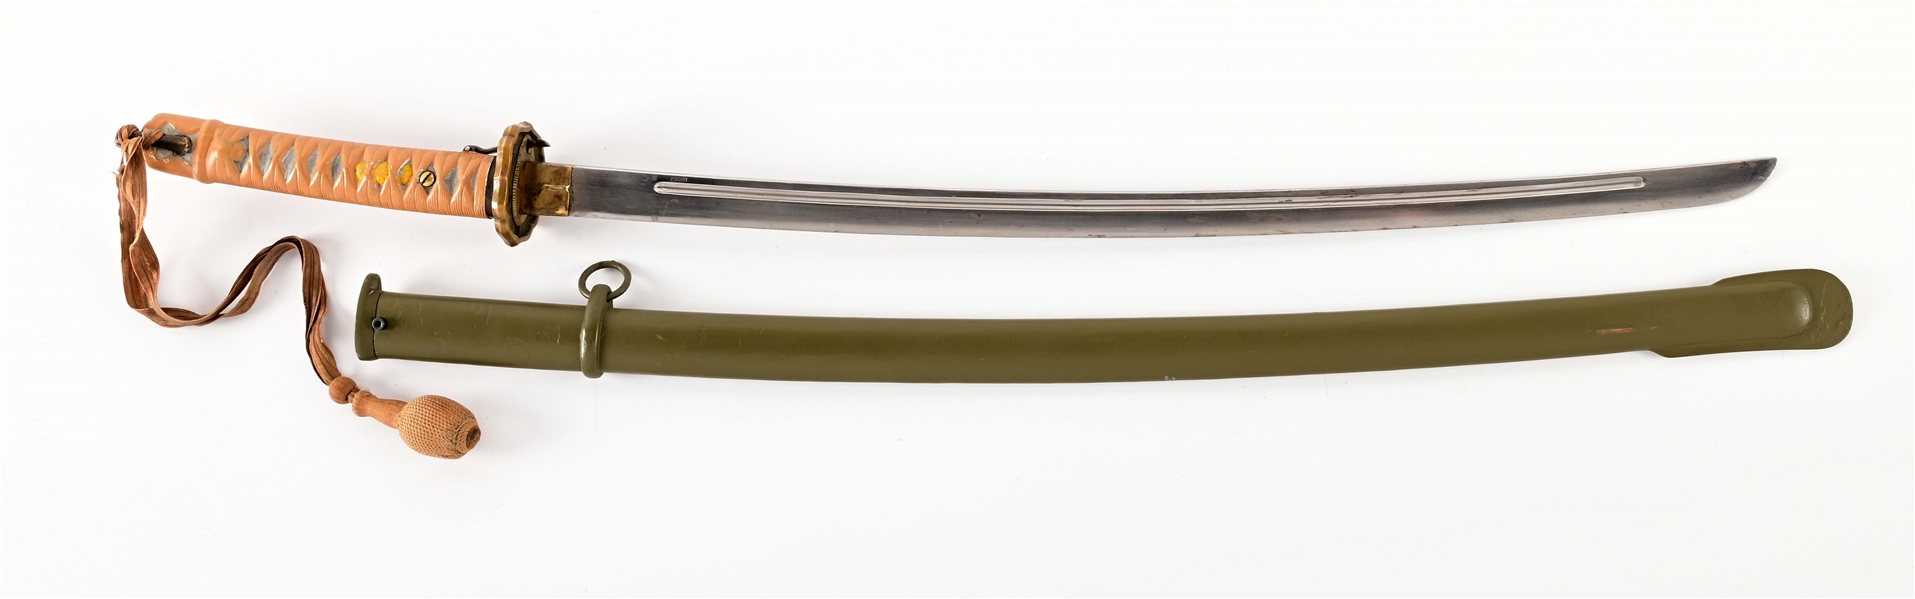 LATER REPRODUCTION OF A JAPANESE WWII TYPE 95 NCO SWORD.